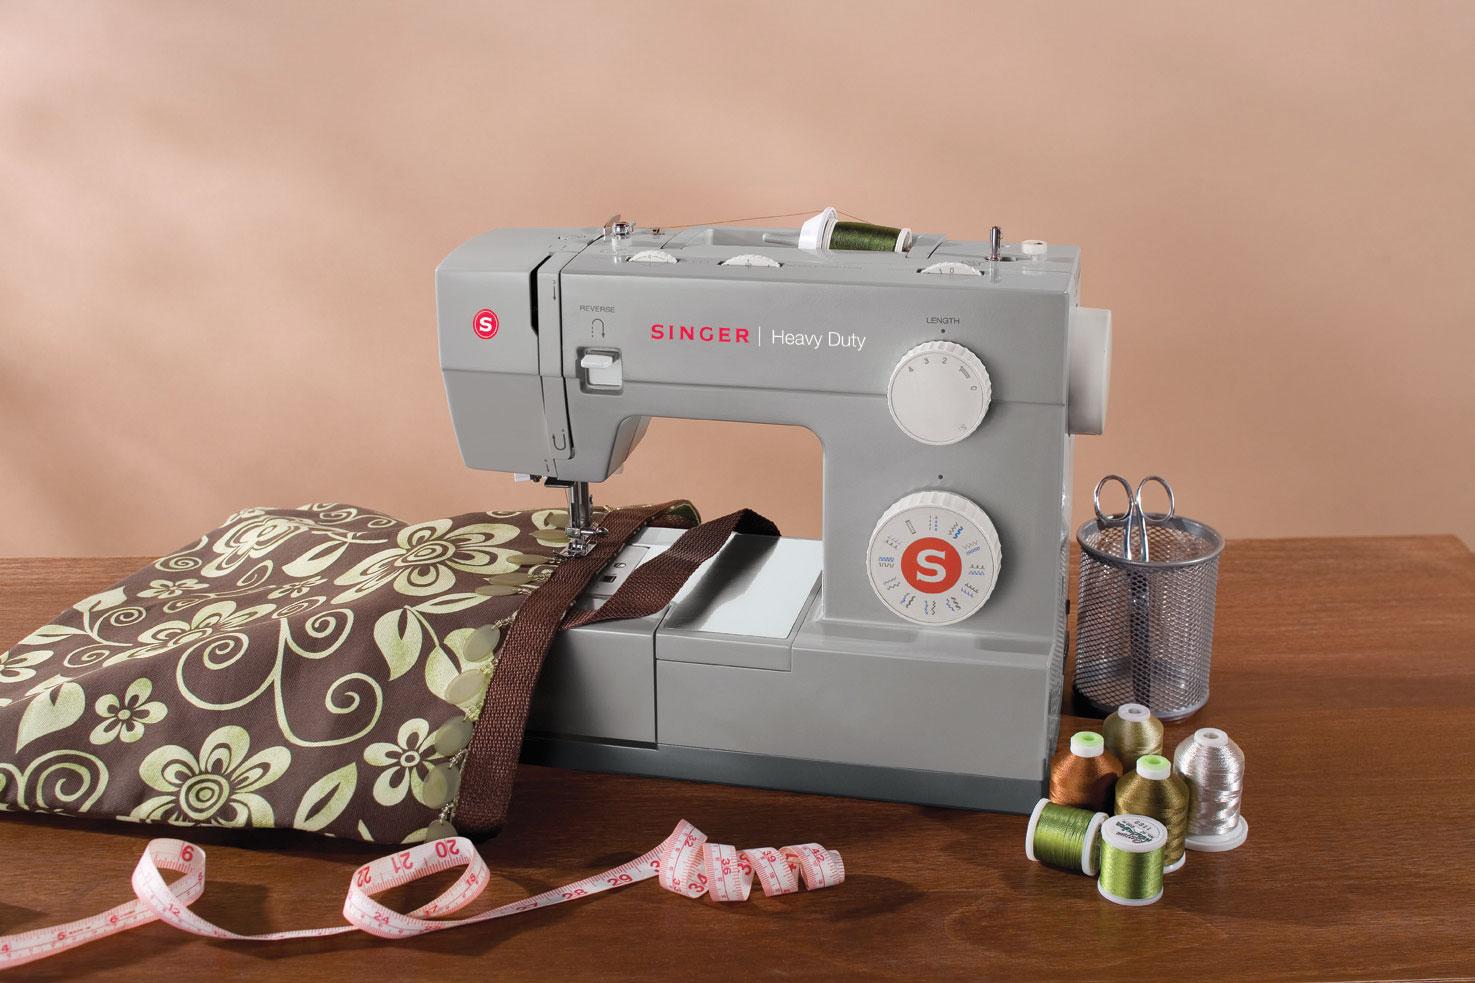 Singer - Heavy Duty sewing machine - household items - by owner